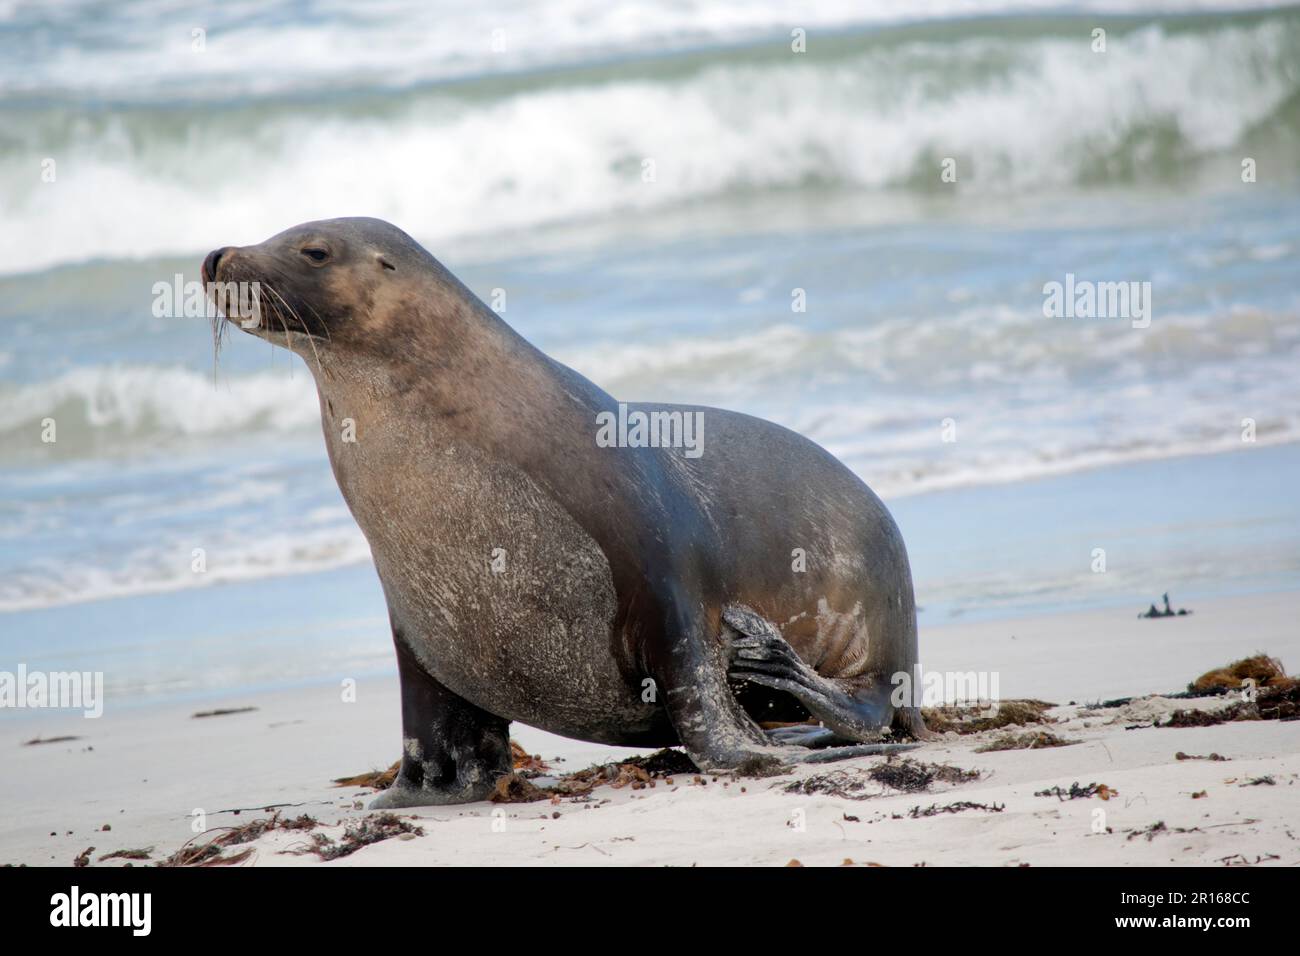 the male sea lion is a darker grey with white or golden hair on top Stock Photo